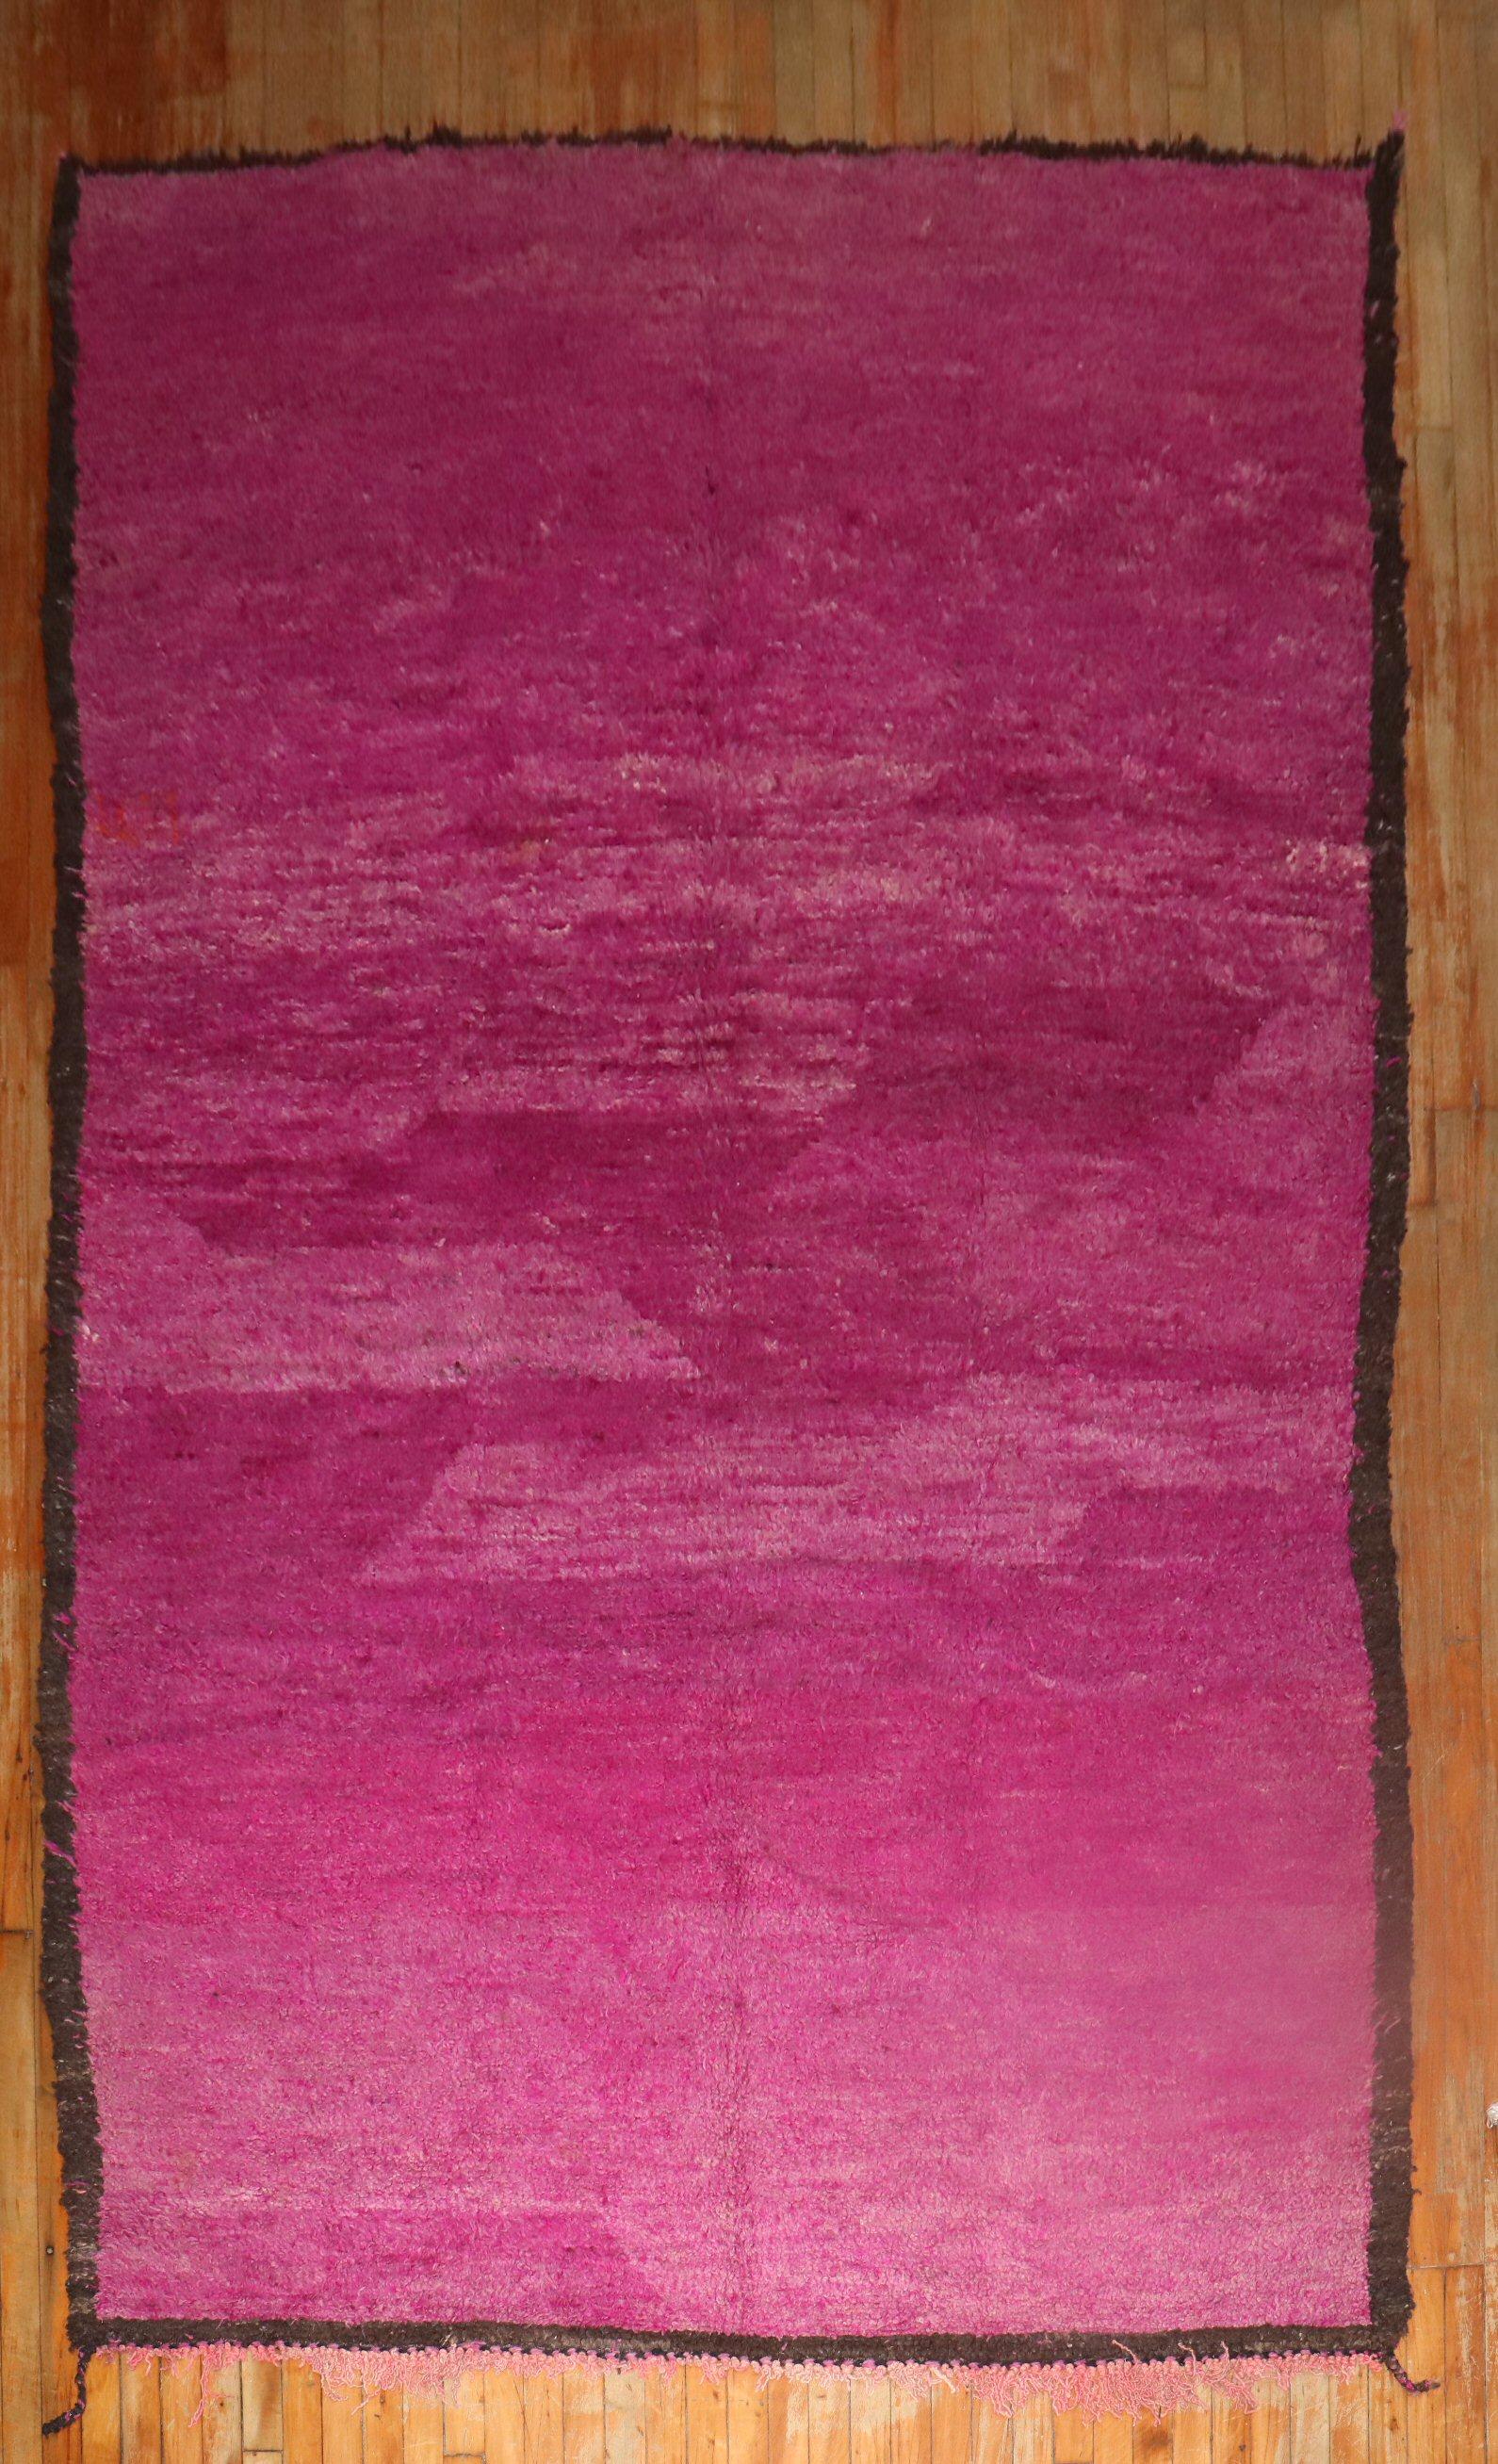 An authentic 20th-century Moroccan rug with a Minimalist pattern in fuchsia surrounded by a narrow brown border. Boho chic at its finest!

Size: 6'5'' x 10'10